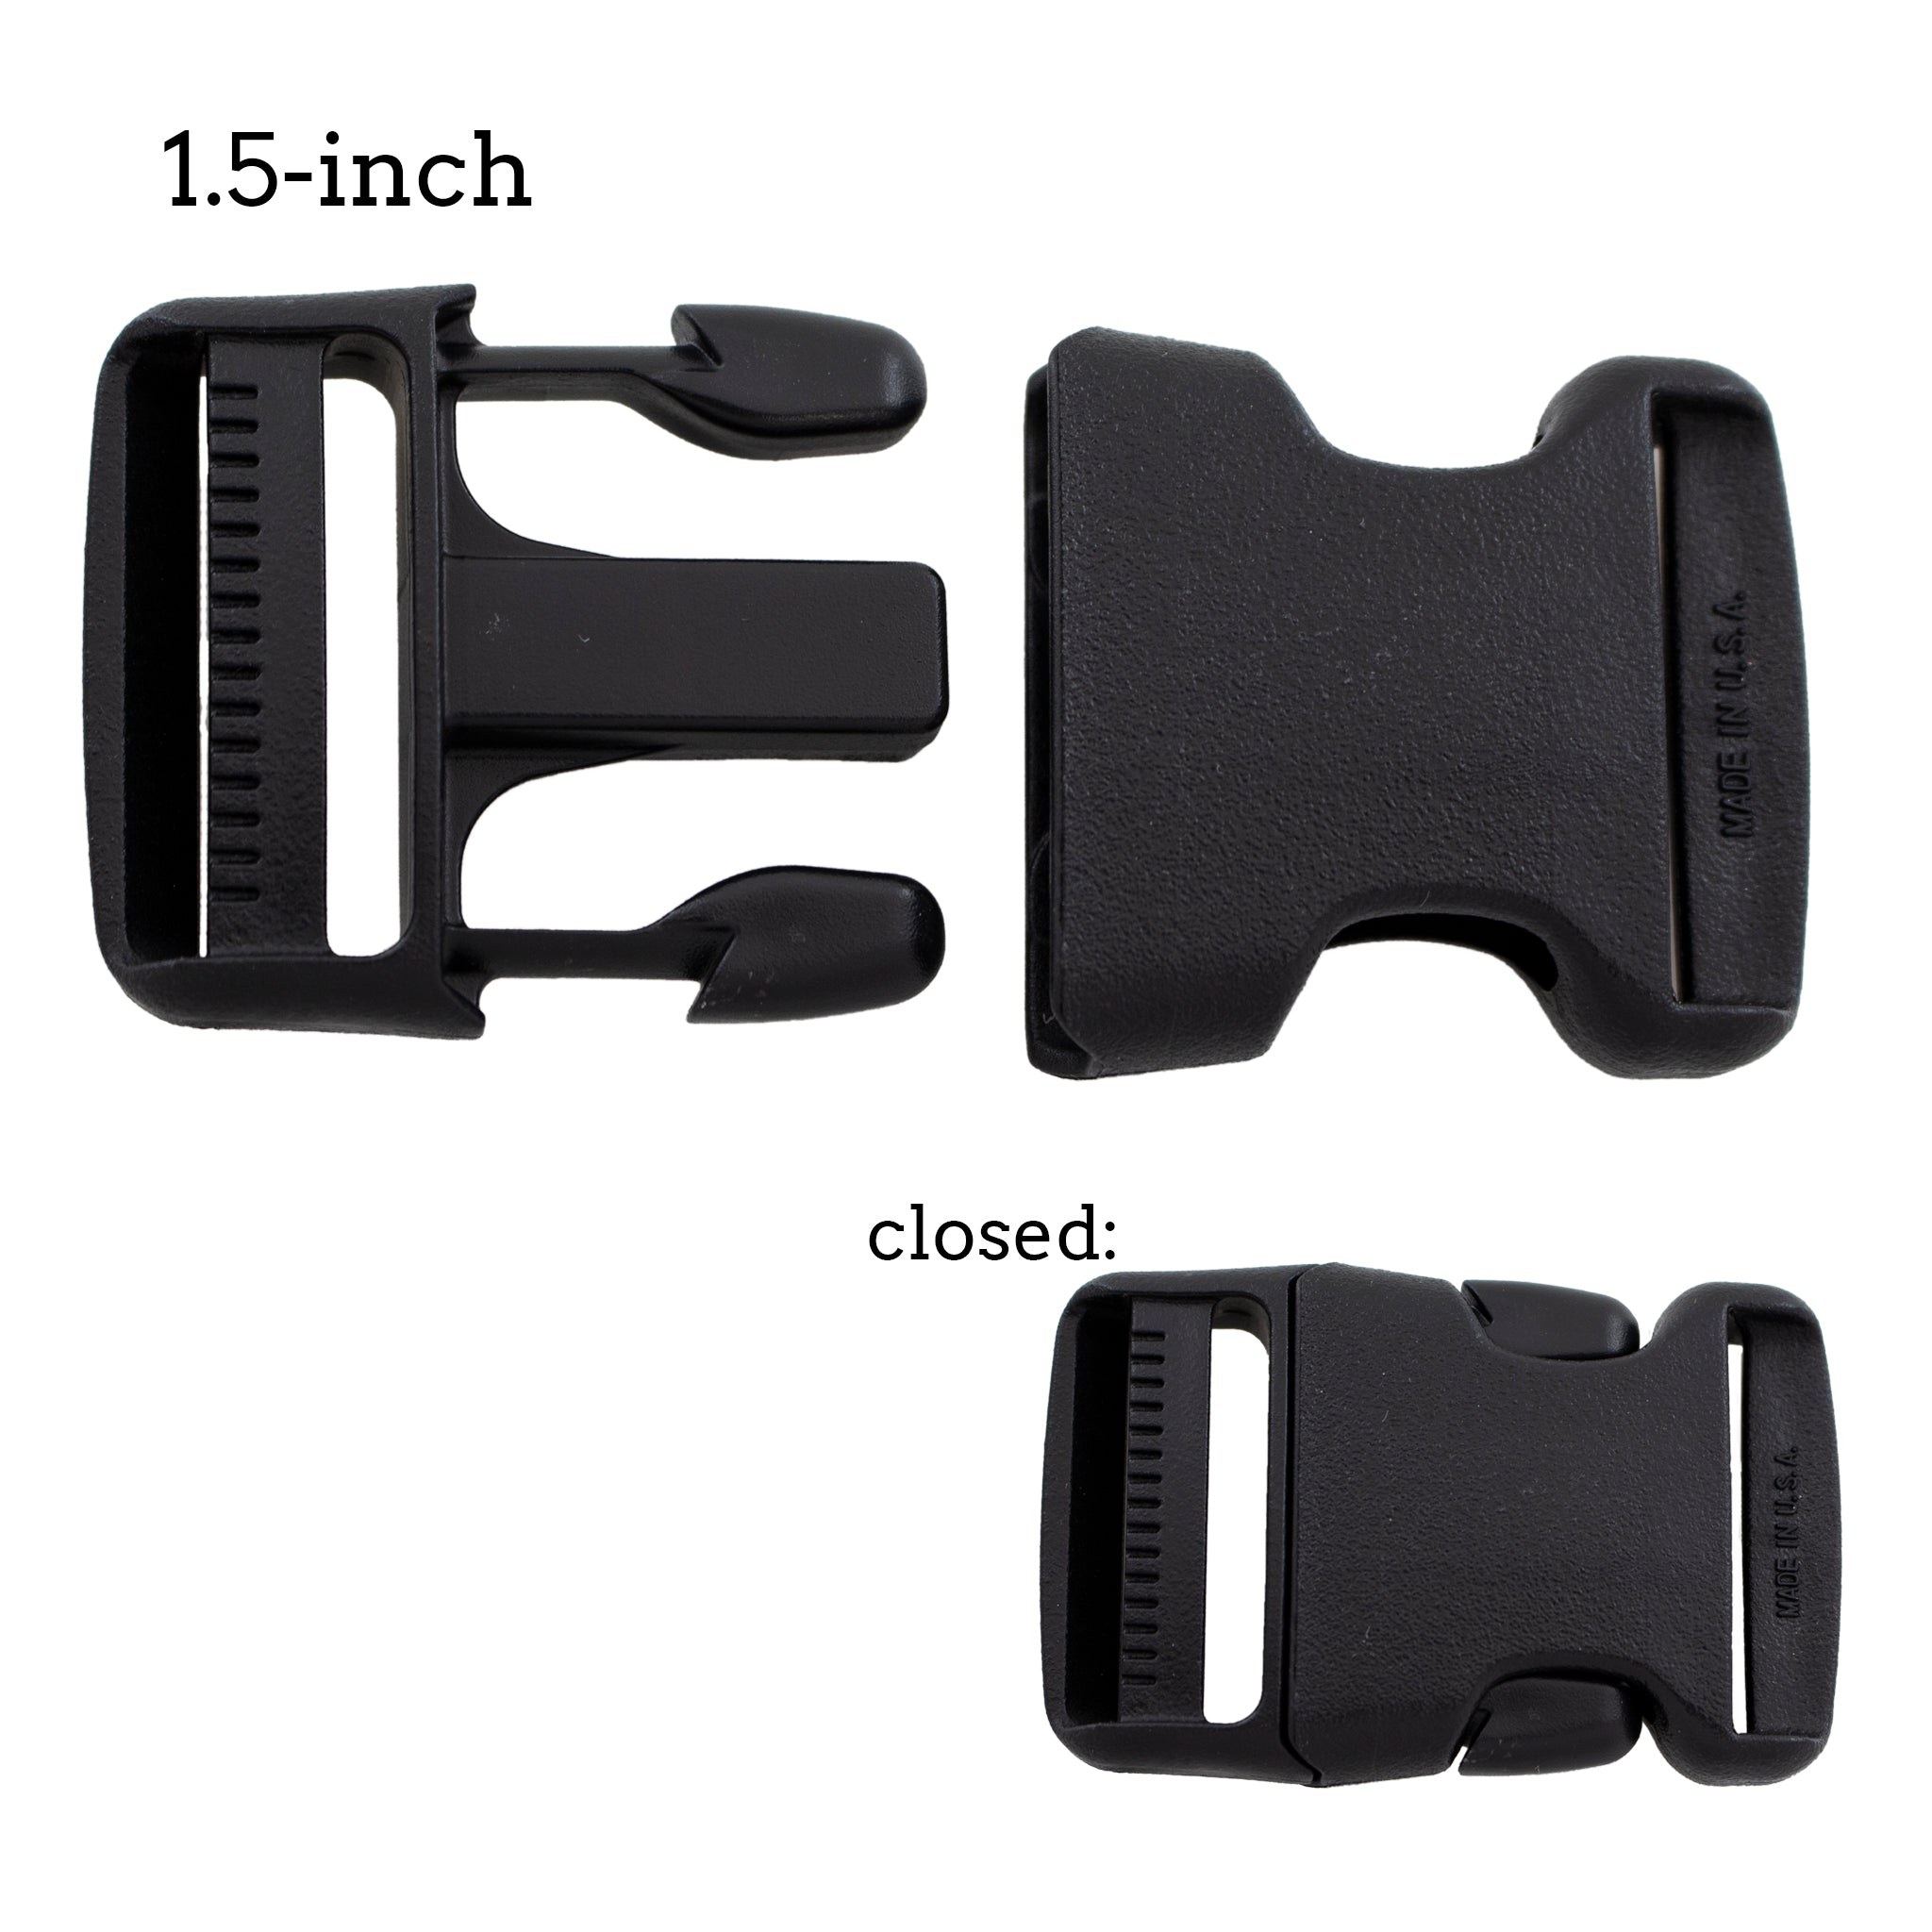 Sexy Fasteners Bra Clips Strap Holders Underwear Party Bra Buckles  Intimates Buckle 10 PCS H-shaped Webbing Bra Buckles Shadow Shaped Buckle  Bra Clip Strap Holders Woman Accessories